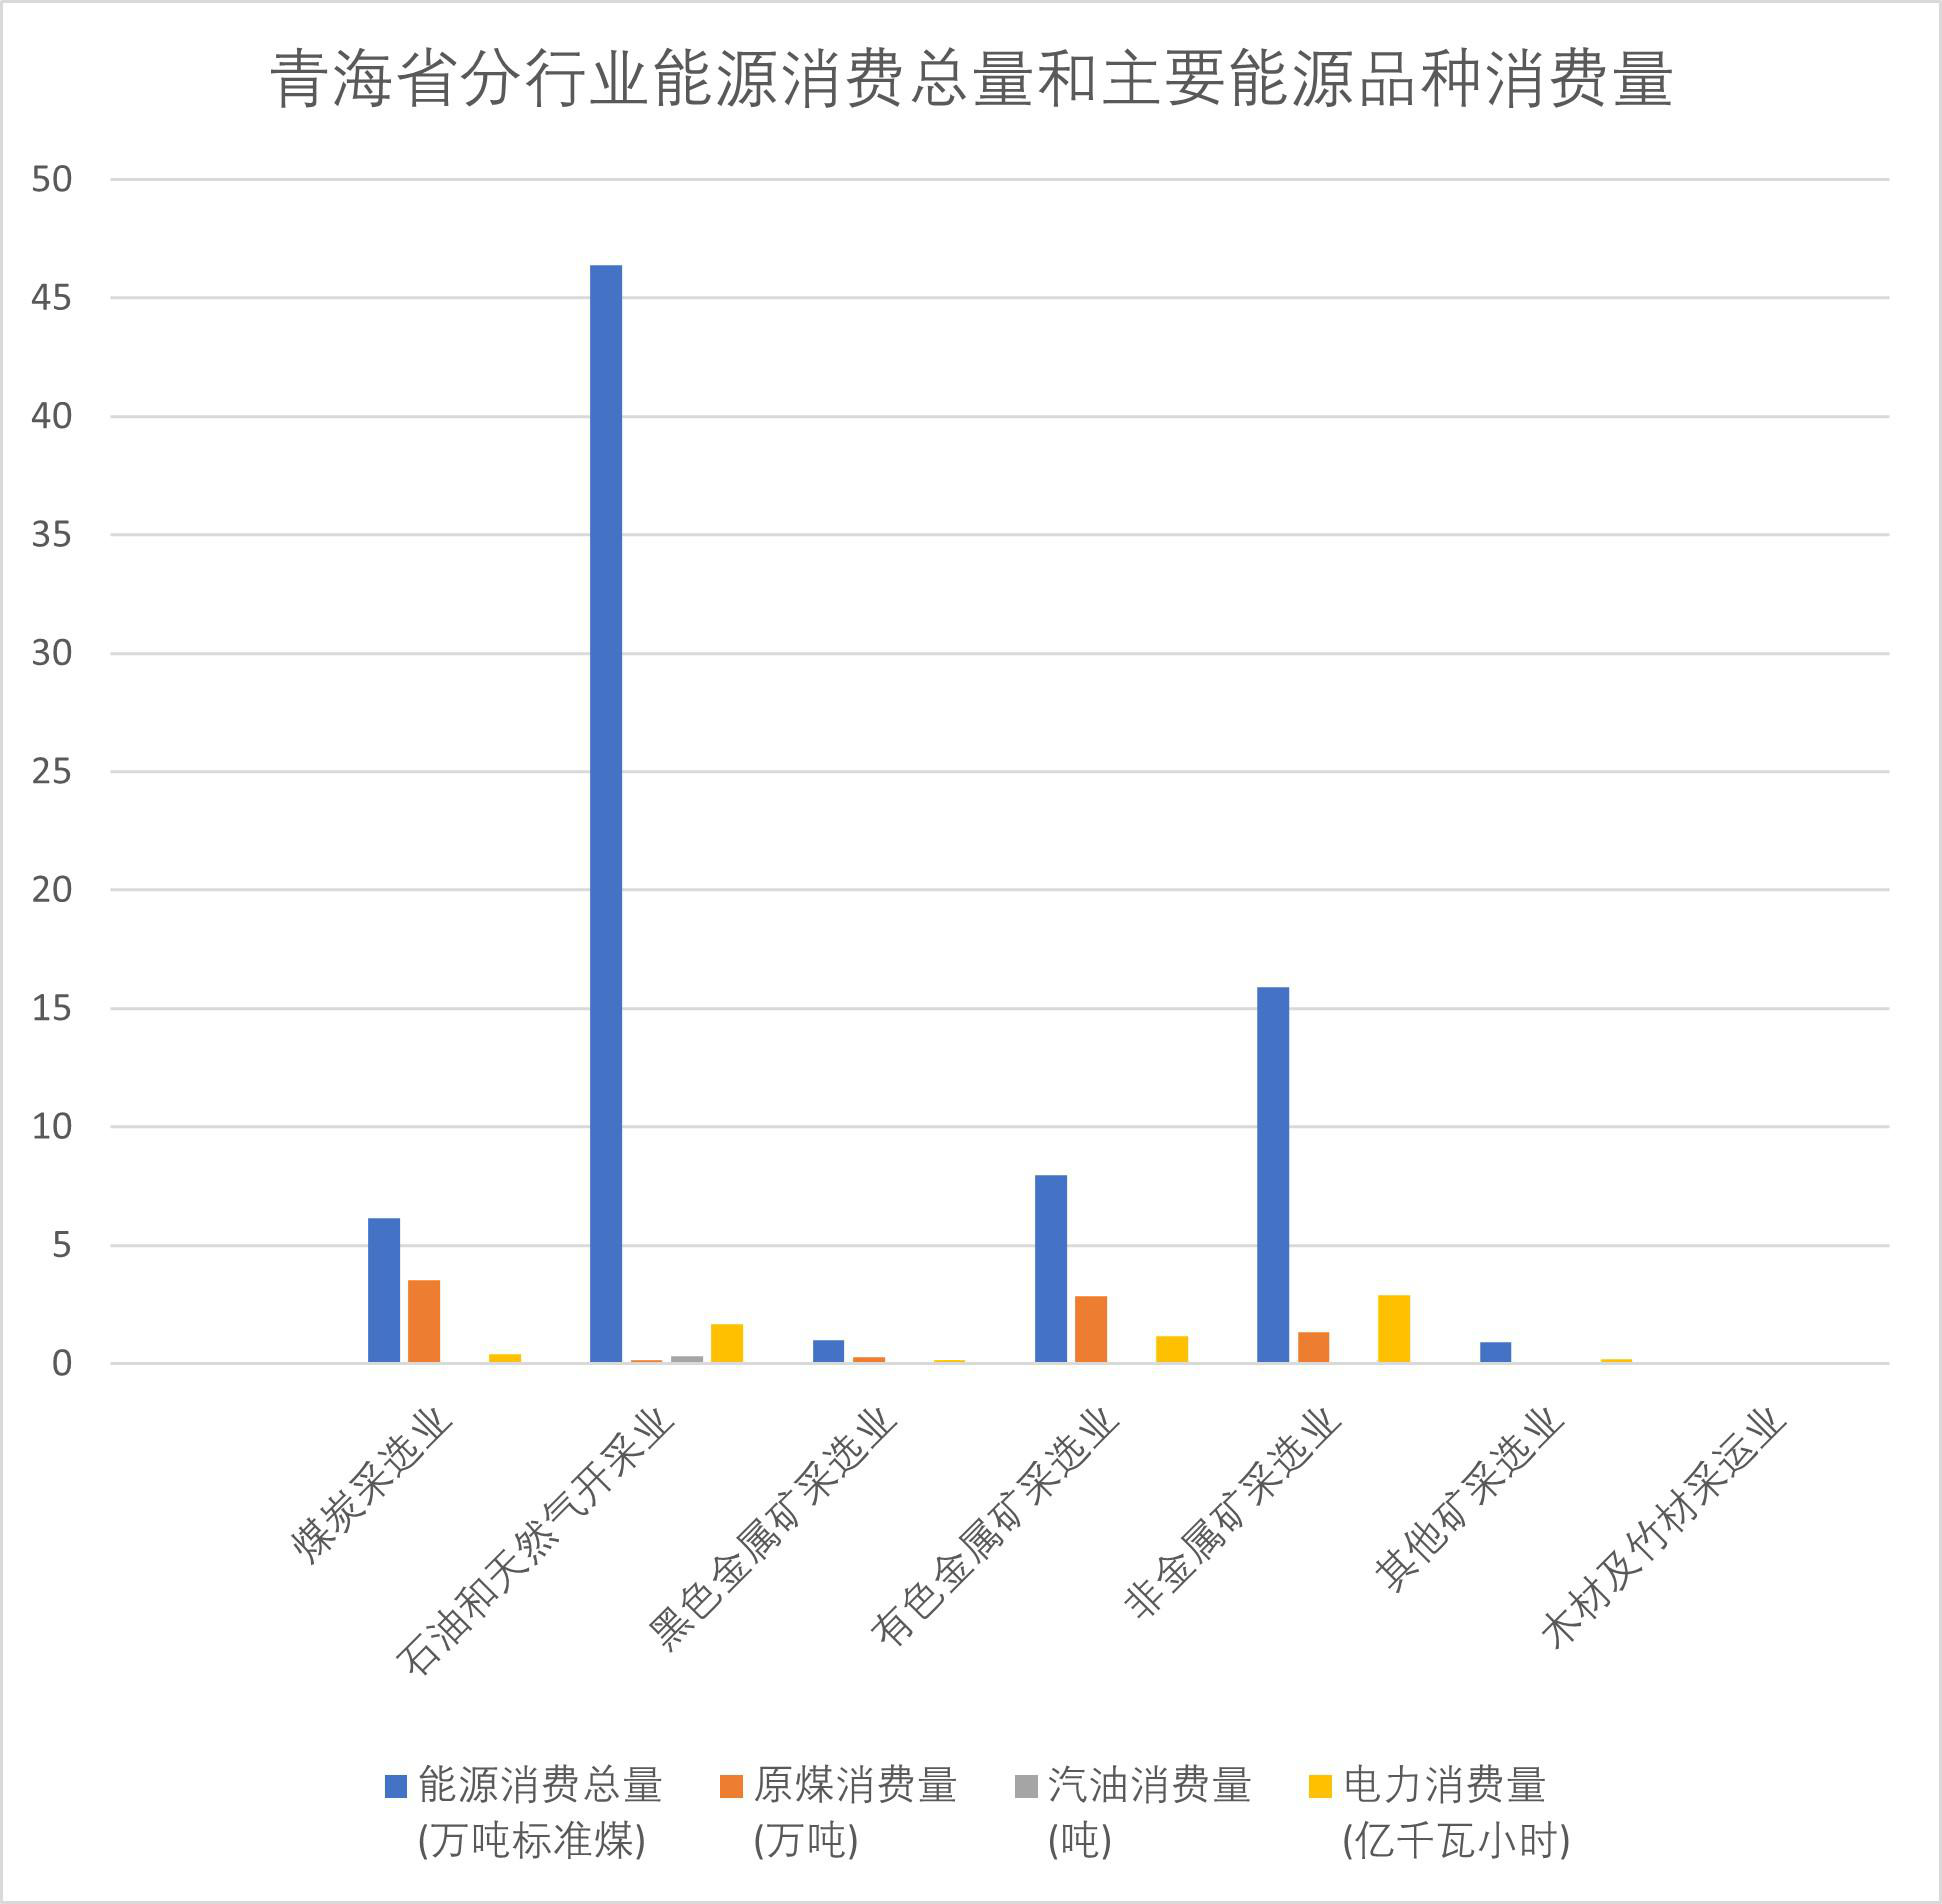 Total energy consumption by industry and consumption of main energy varieties in Qinghai Province (2001-2006)